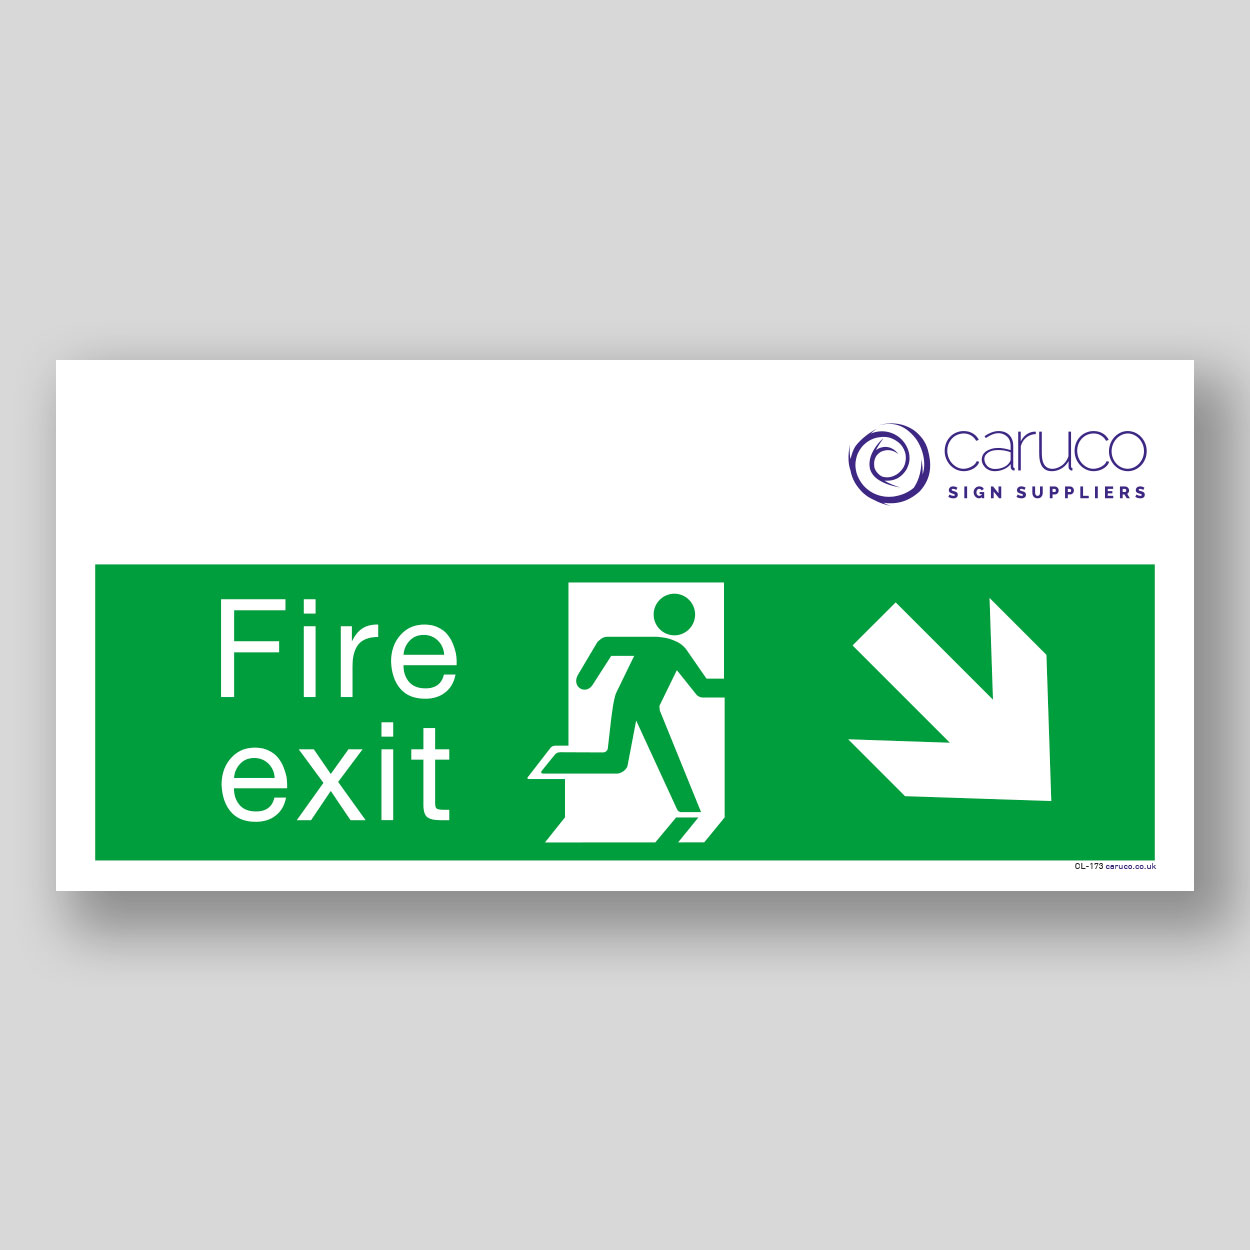 CL-173 Fire exit - with right down arrow